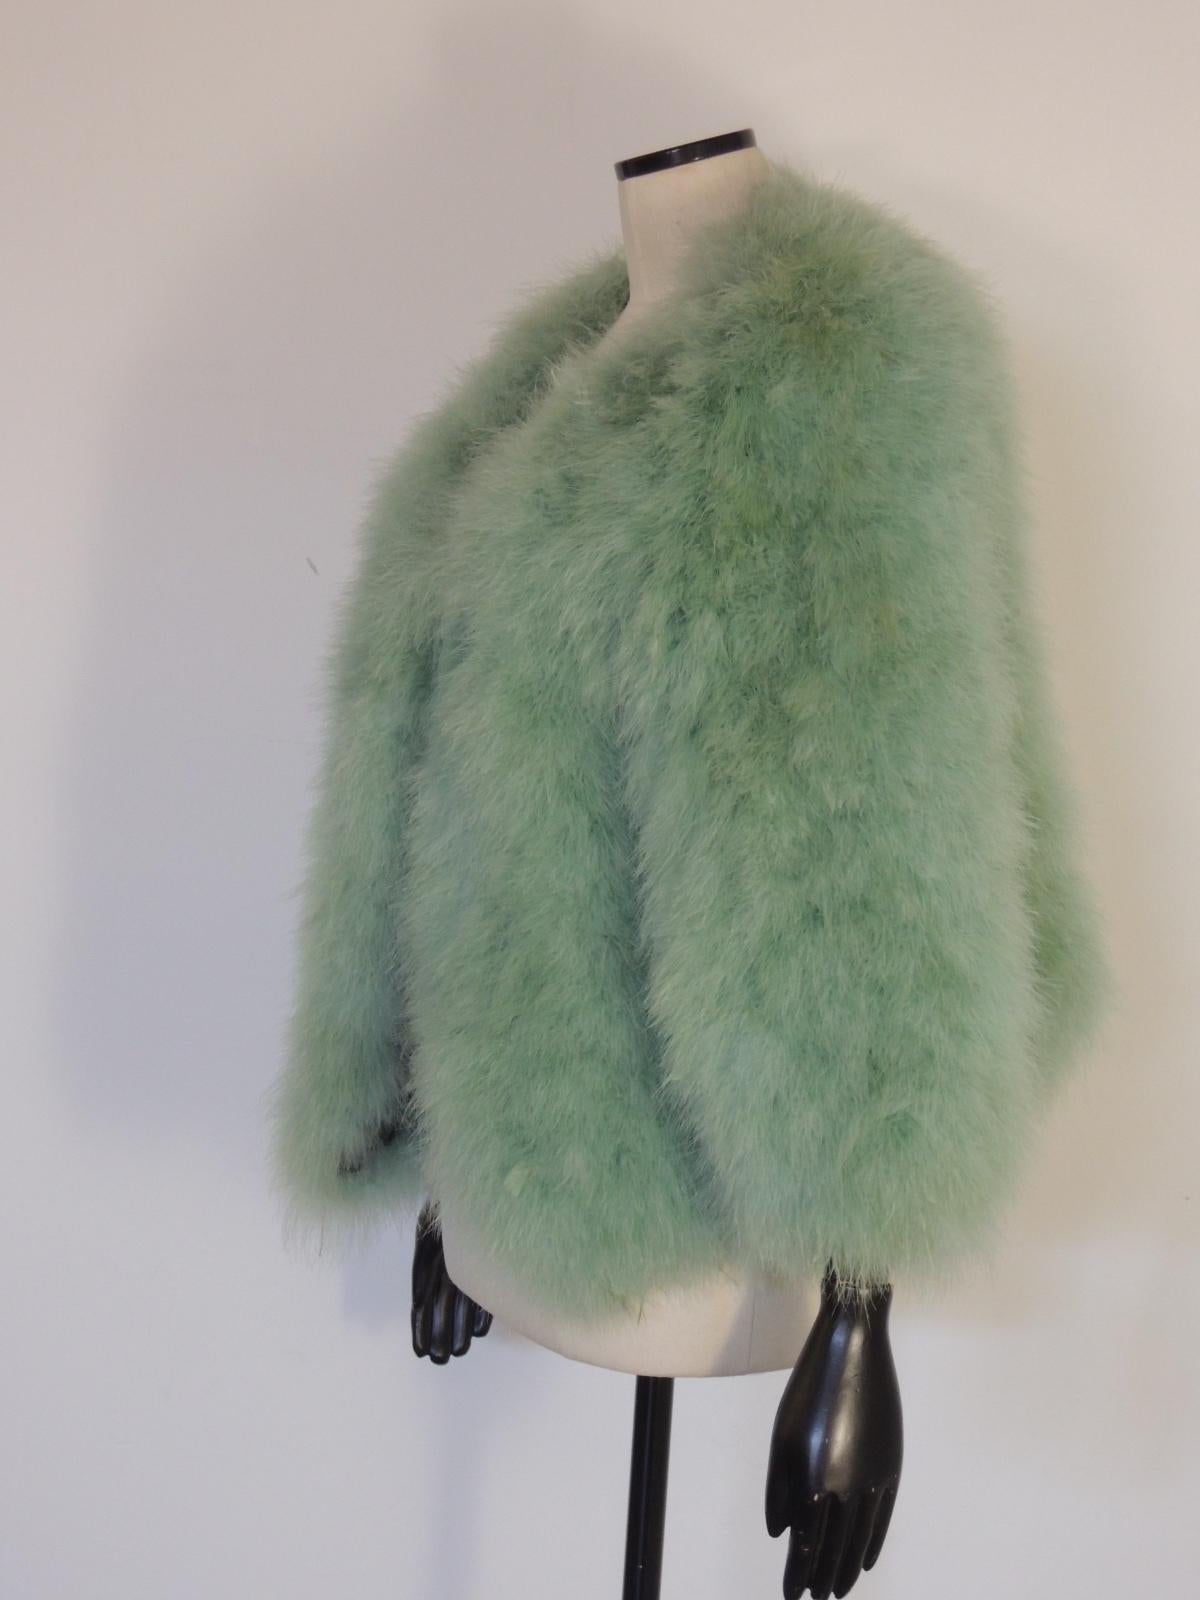 This is an open-front Sonia Rykiel feather jacket in a seafoam green color.

There is no size tag present. 90% turkey feathers, 10% nylon.

This item is in excellent pre-owned condition with no structural defects or stains.

MEASUREMENTS: (taken